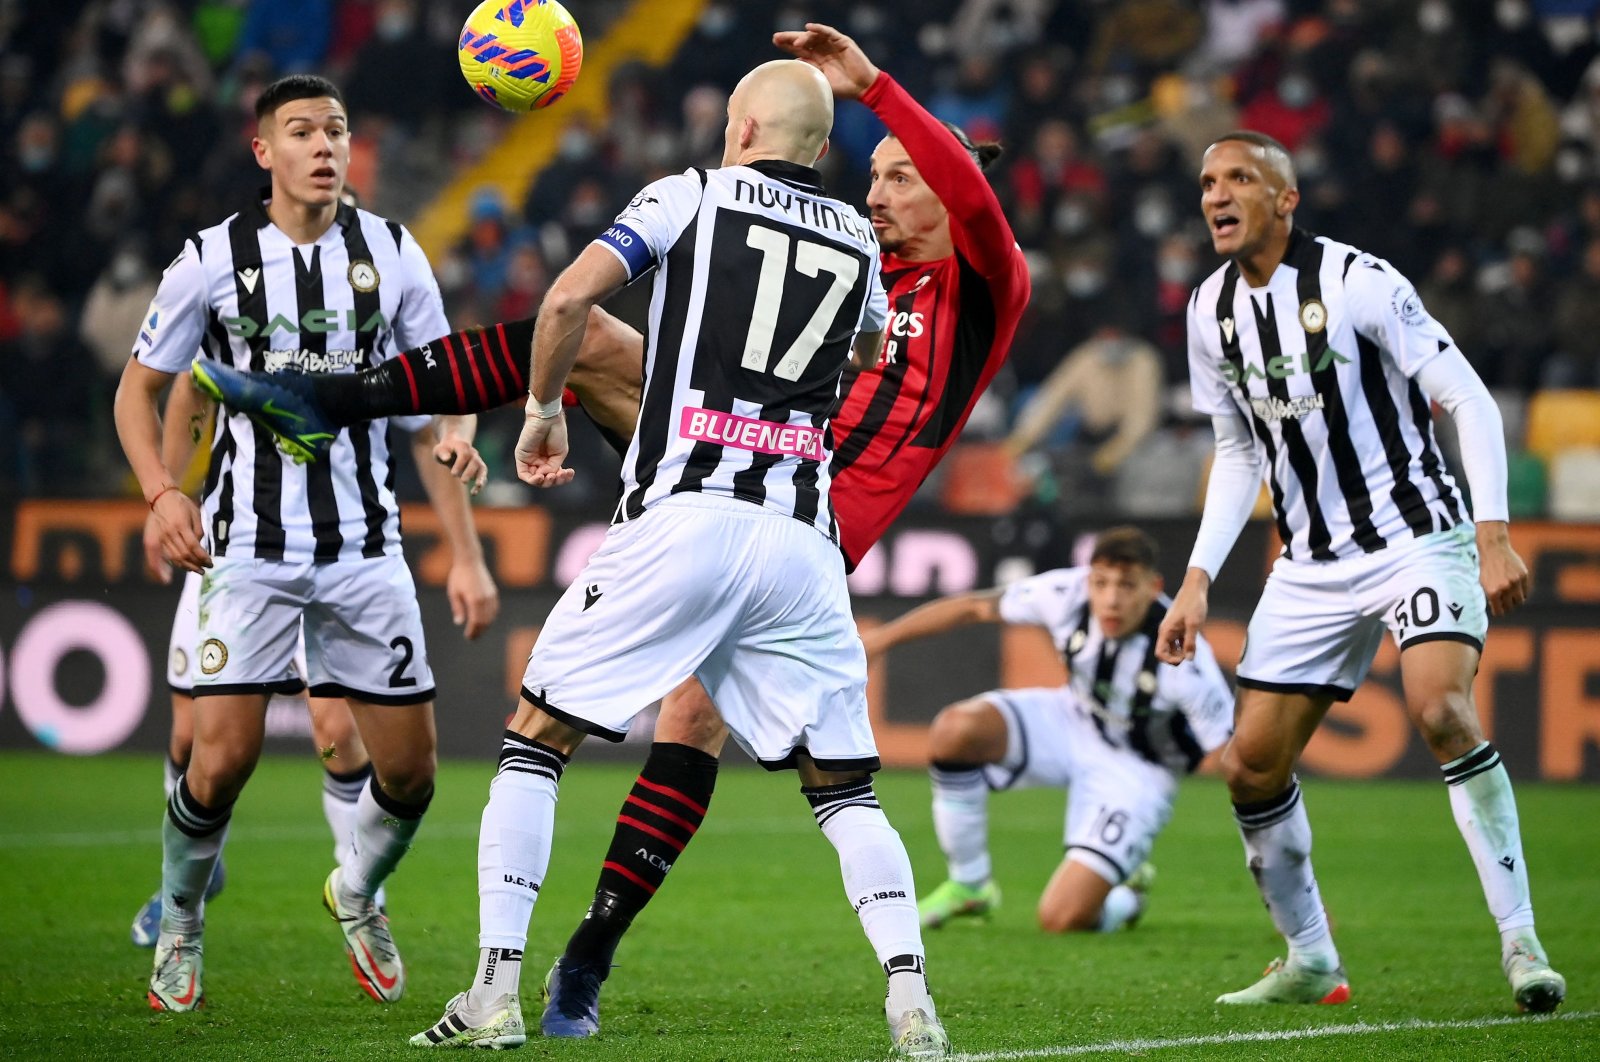 AC Milan&#039;s Zlatan Ibrahimovic (C) shoots and scores in a Serie A match against Udinese, Dec. 11, 2021. (AFP Photo)